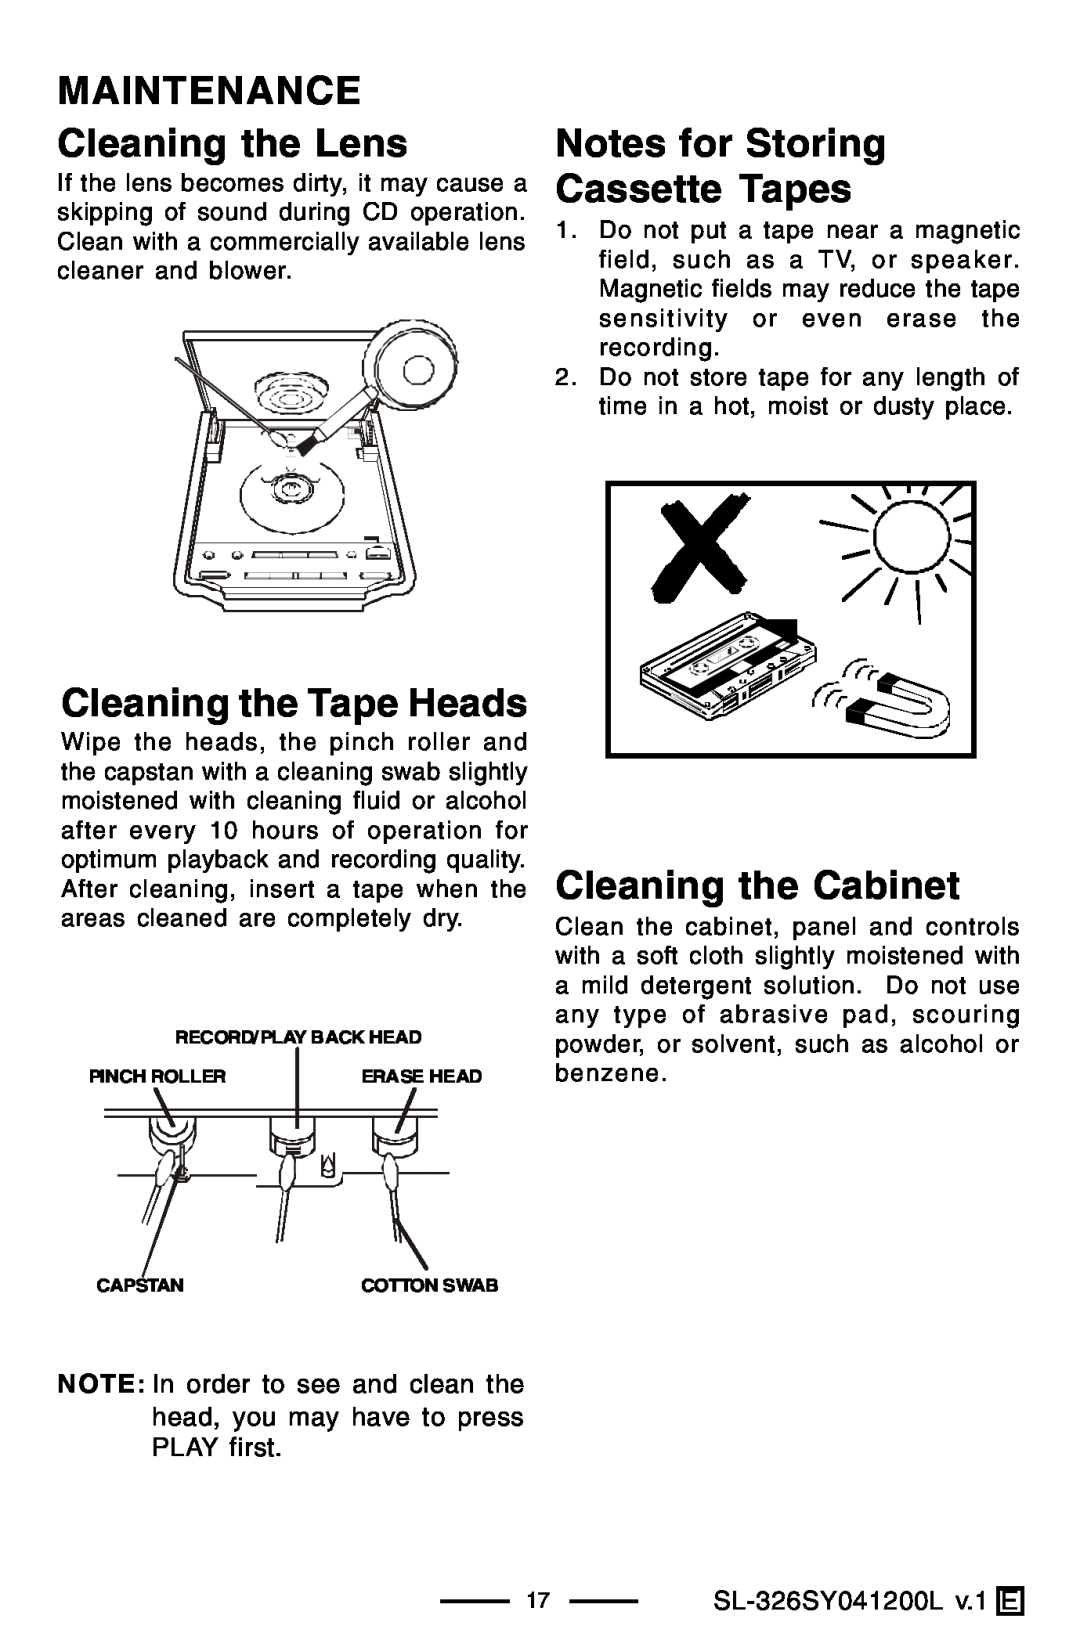 Lenoxx Electronics SL-326 manual MAINTENANCE Cleaning the Lens, Cleaning the Tape Heads, Notes for Storing Cassette Tapes 